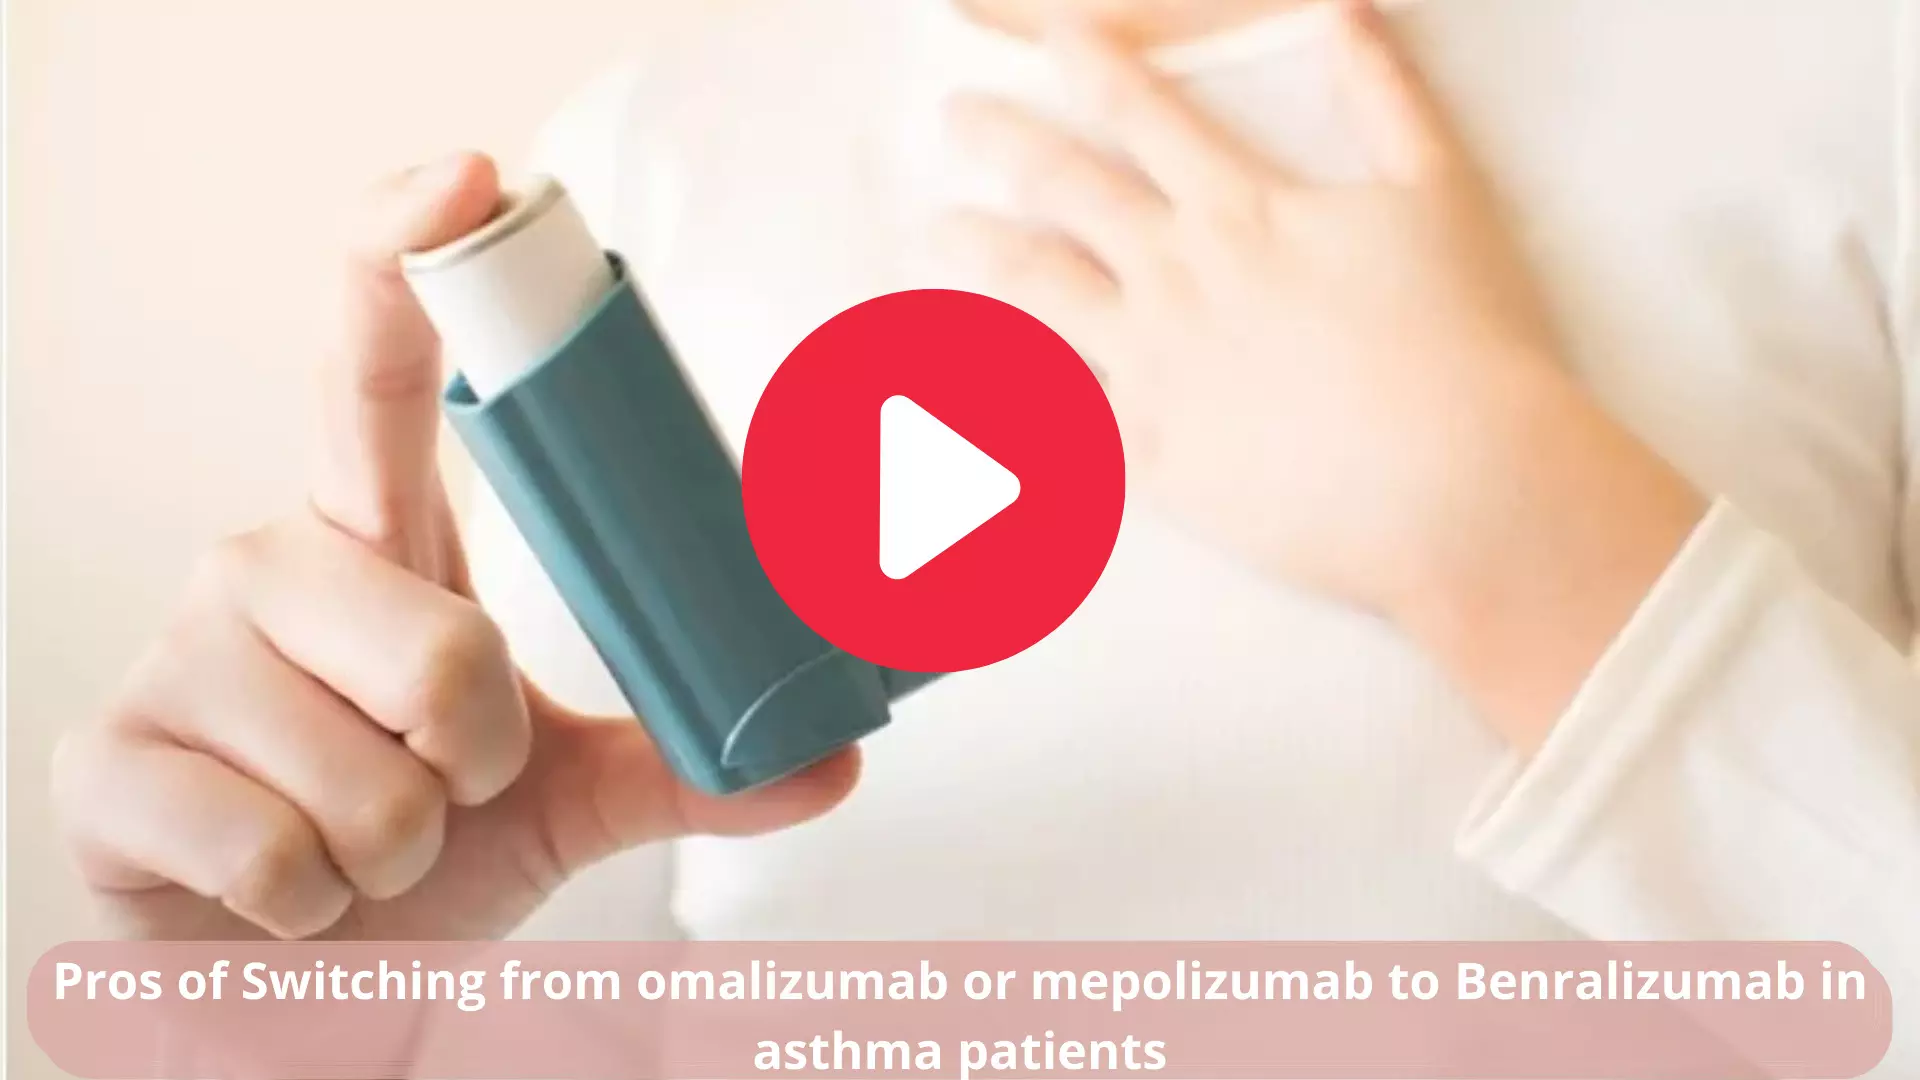 Pros of Switching from omalizumab or mepolizumab to Benralizumab in asthma patients